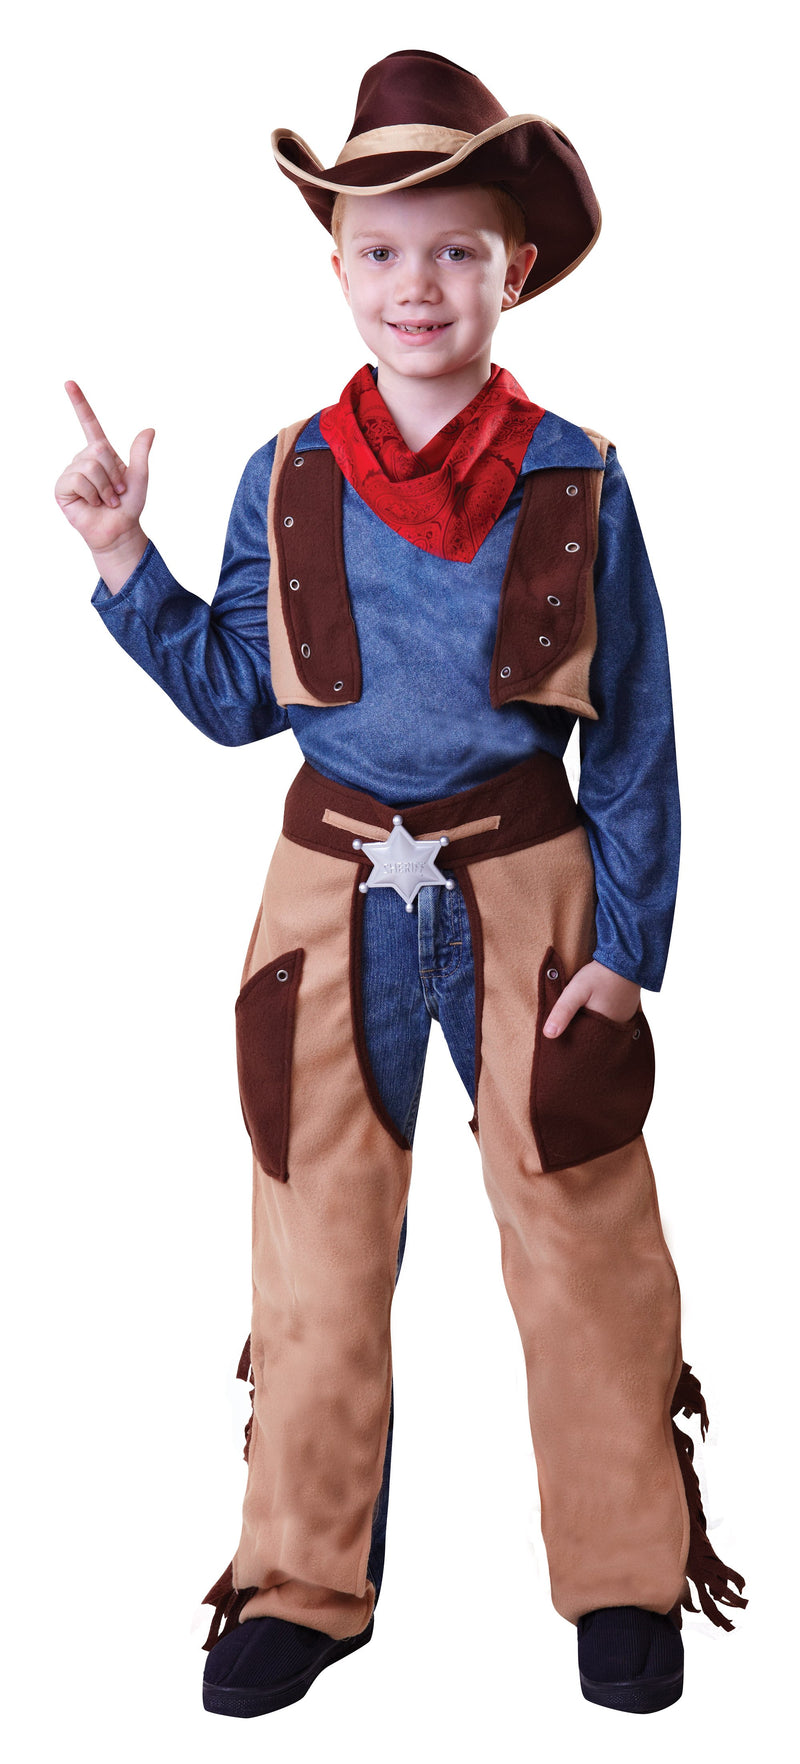 Cowboy Wild West S Childrens Costumes Male To Fit Child Of Height 110cm 122cm Boys Bristol Novelty Childrens Costumes 2246